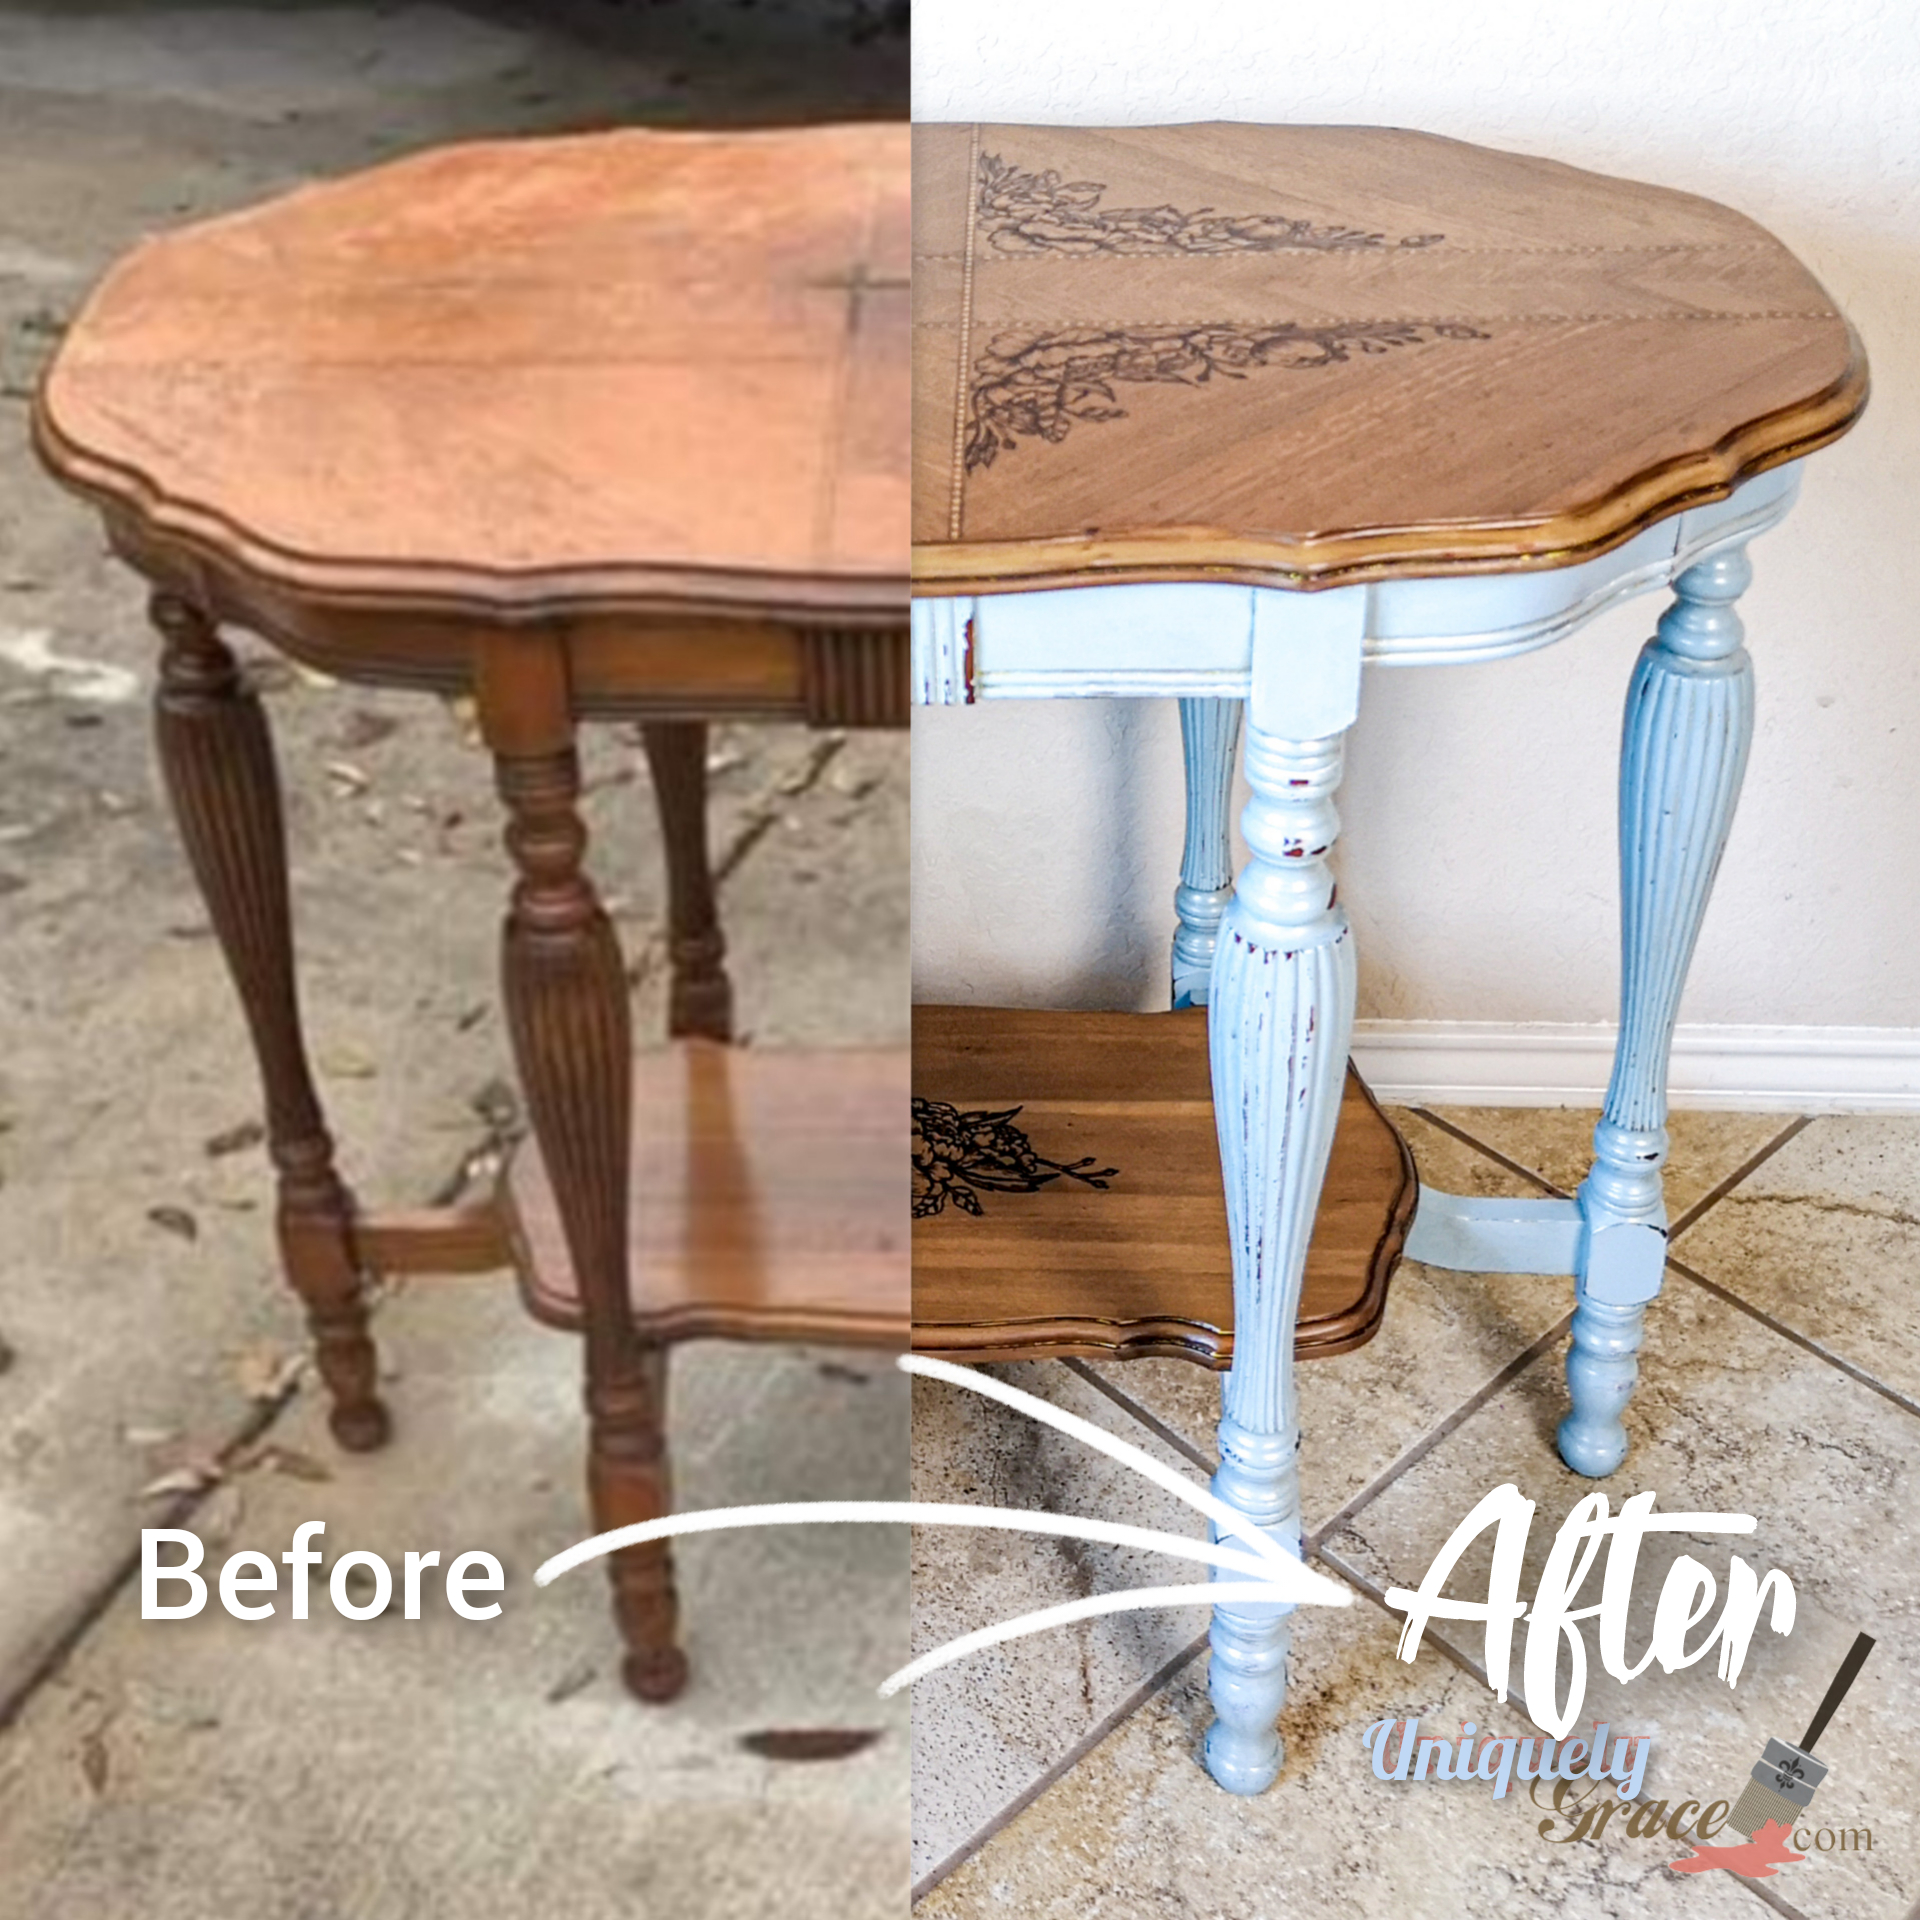 French country parlor table before and after Uniquely Grace Designs refinished it.